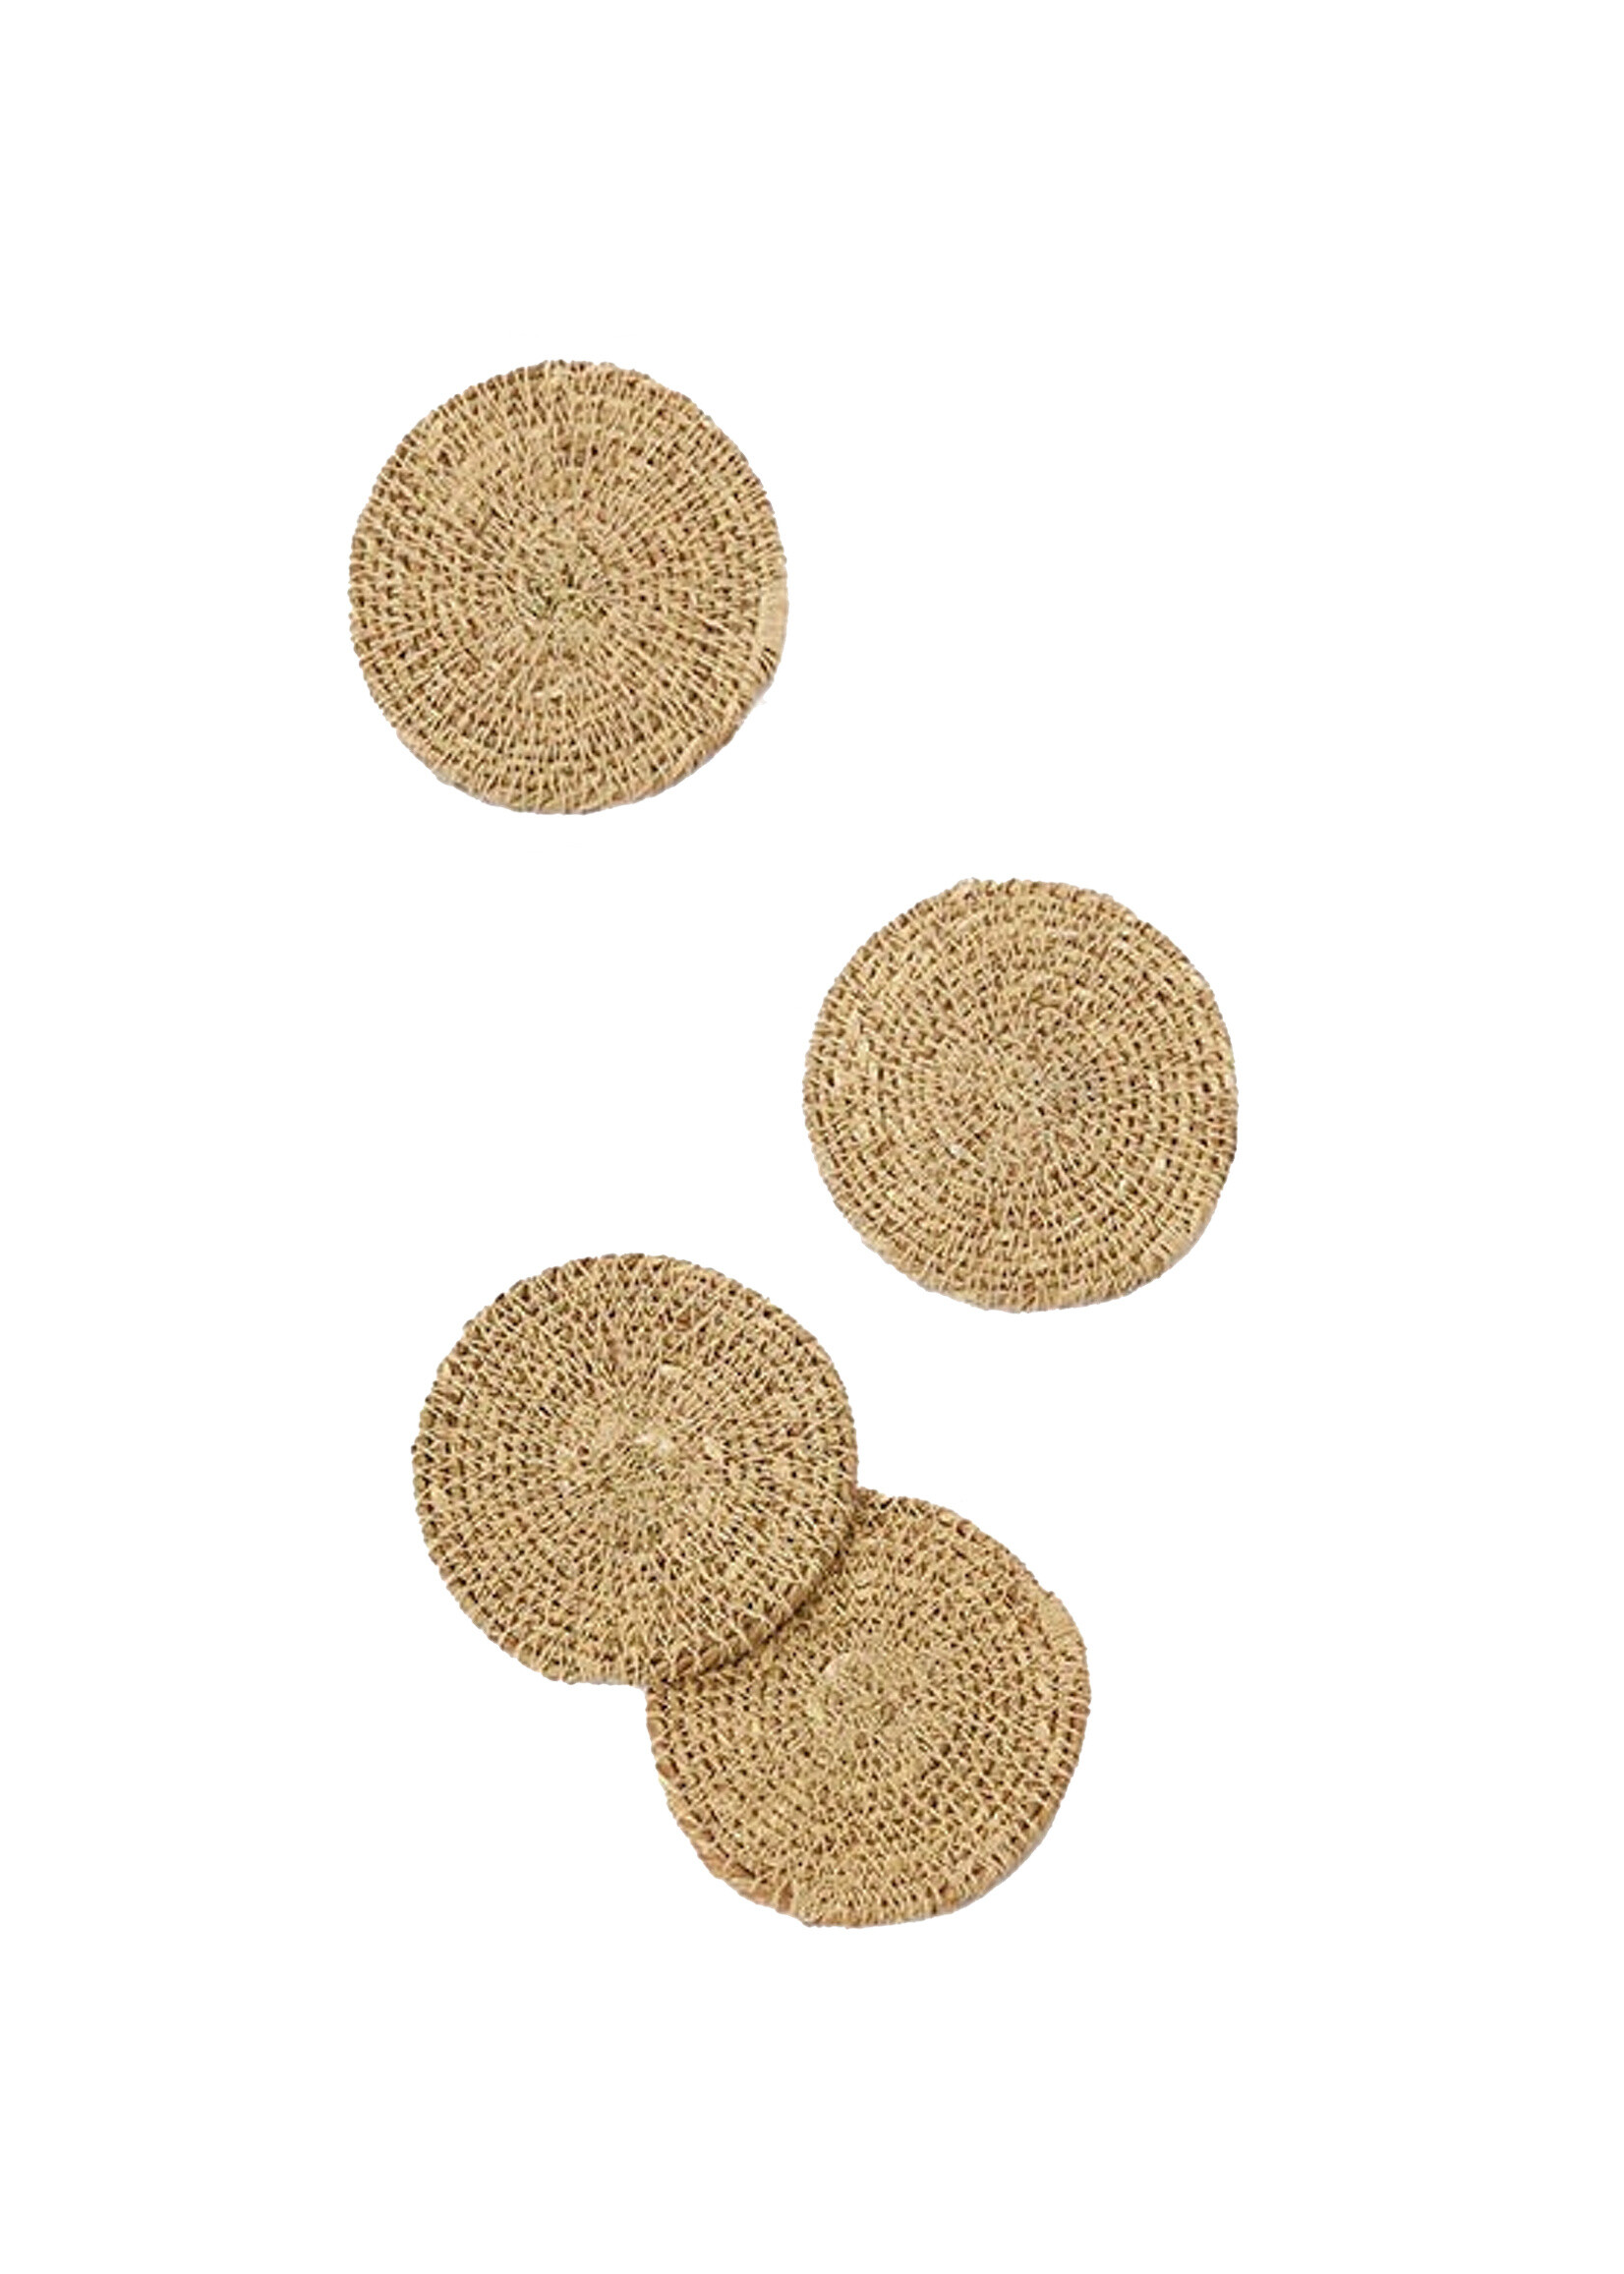 Woven Coasters Natural S/4